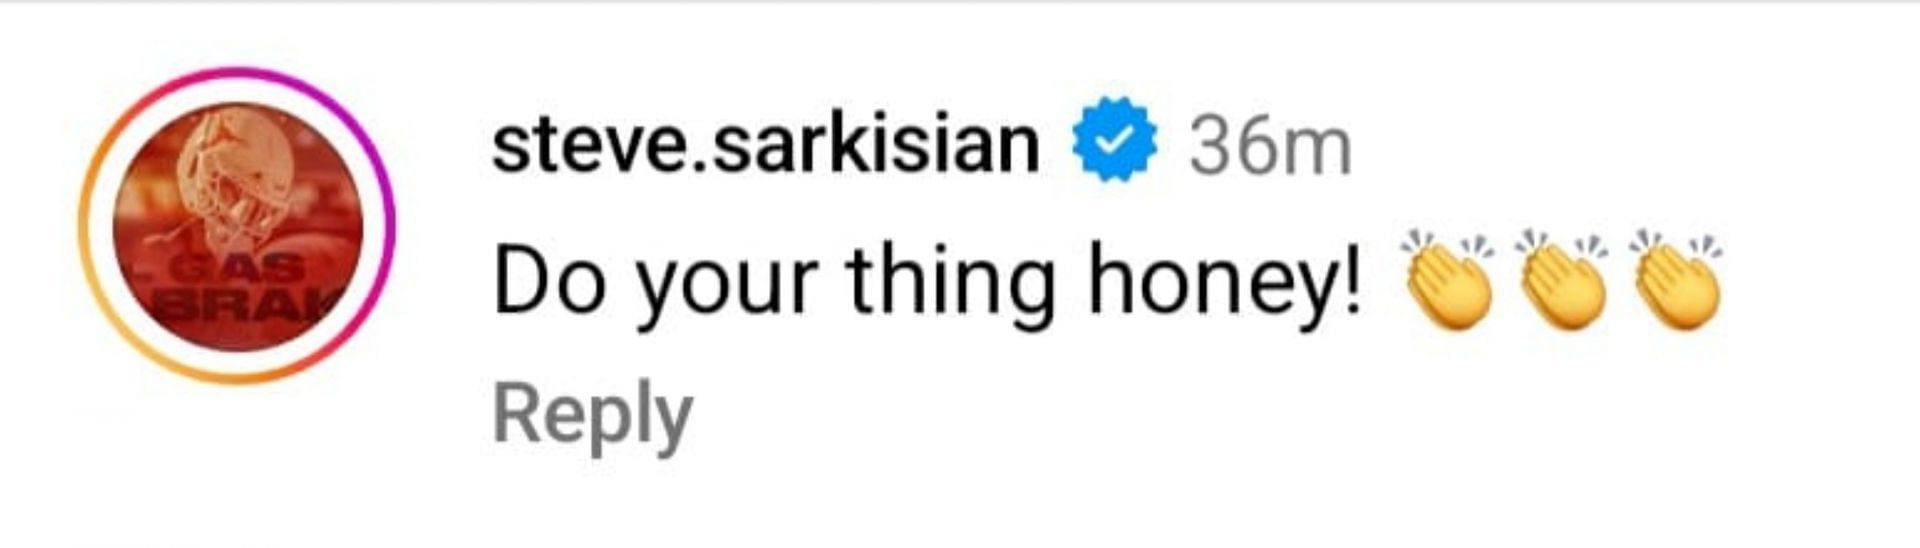 Steve Sarkisian&#039;s comment on the post.